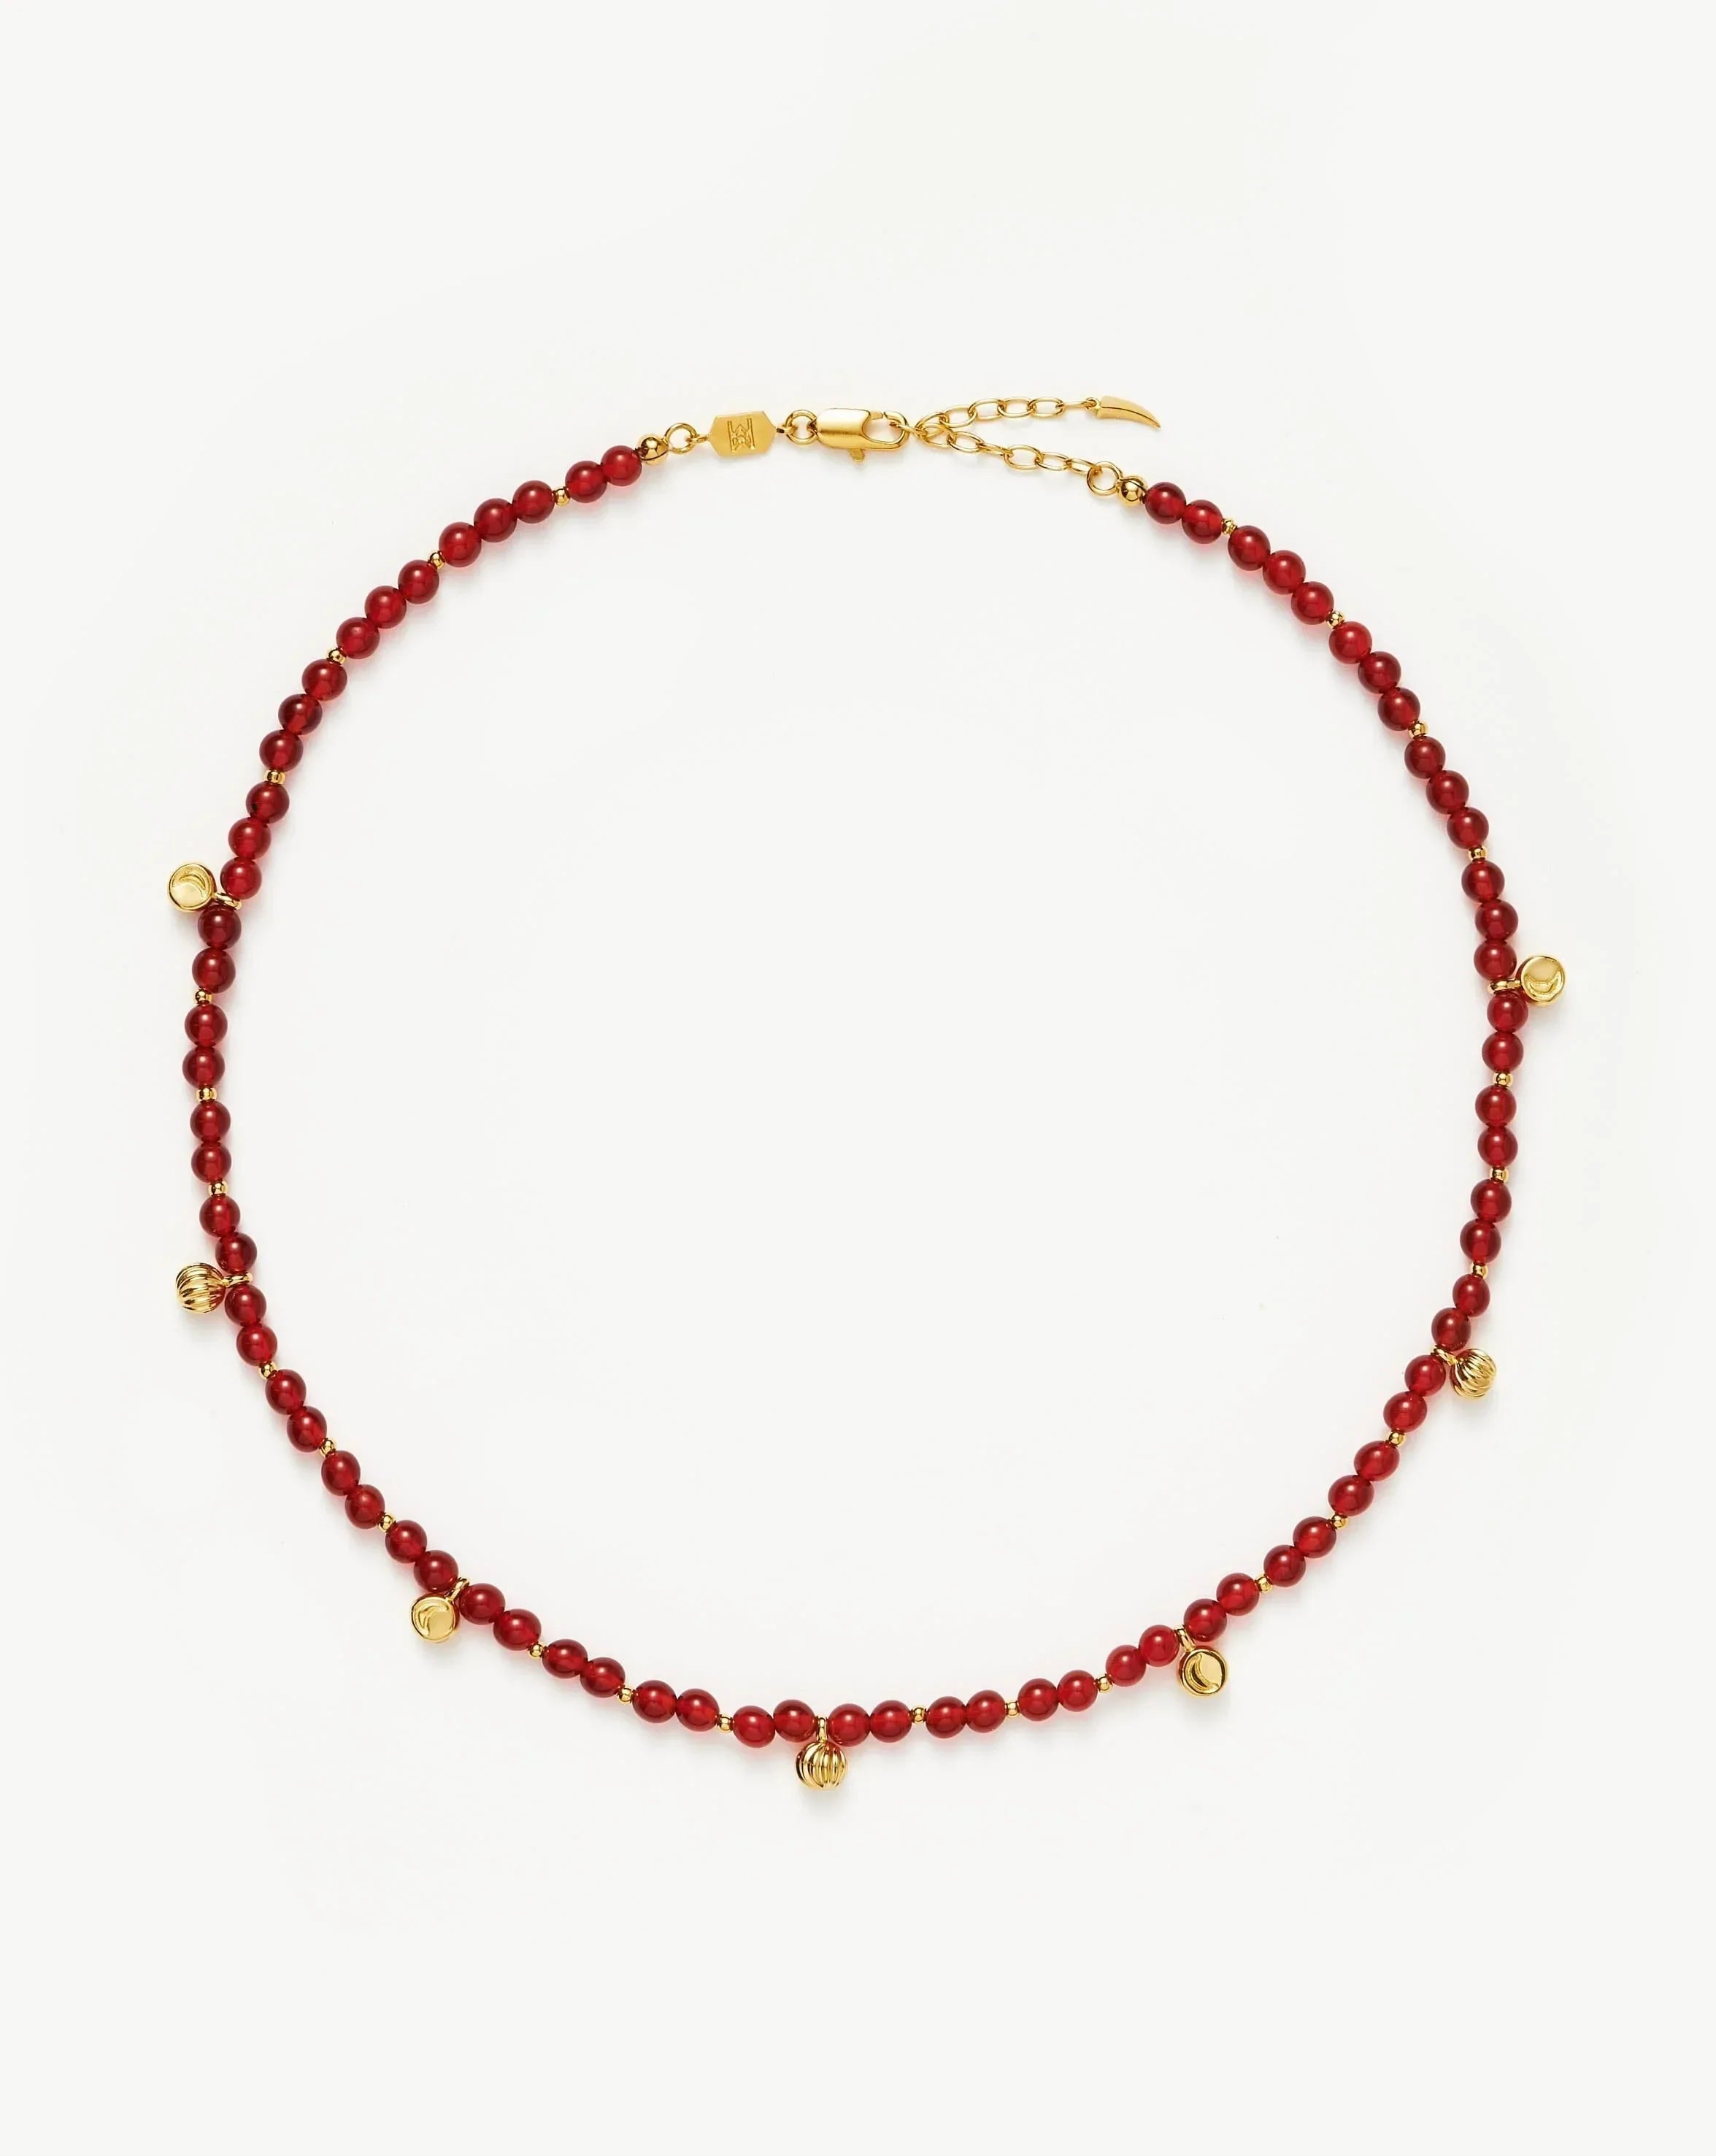 Savi Gemstone Beaded Necklace | 18ct Gold Plated Vermeil/Red Chalcedony Necklaces Missoma 18ct Gold Plated/Red Chalcedony 